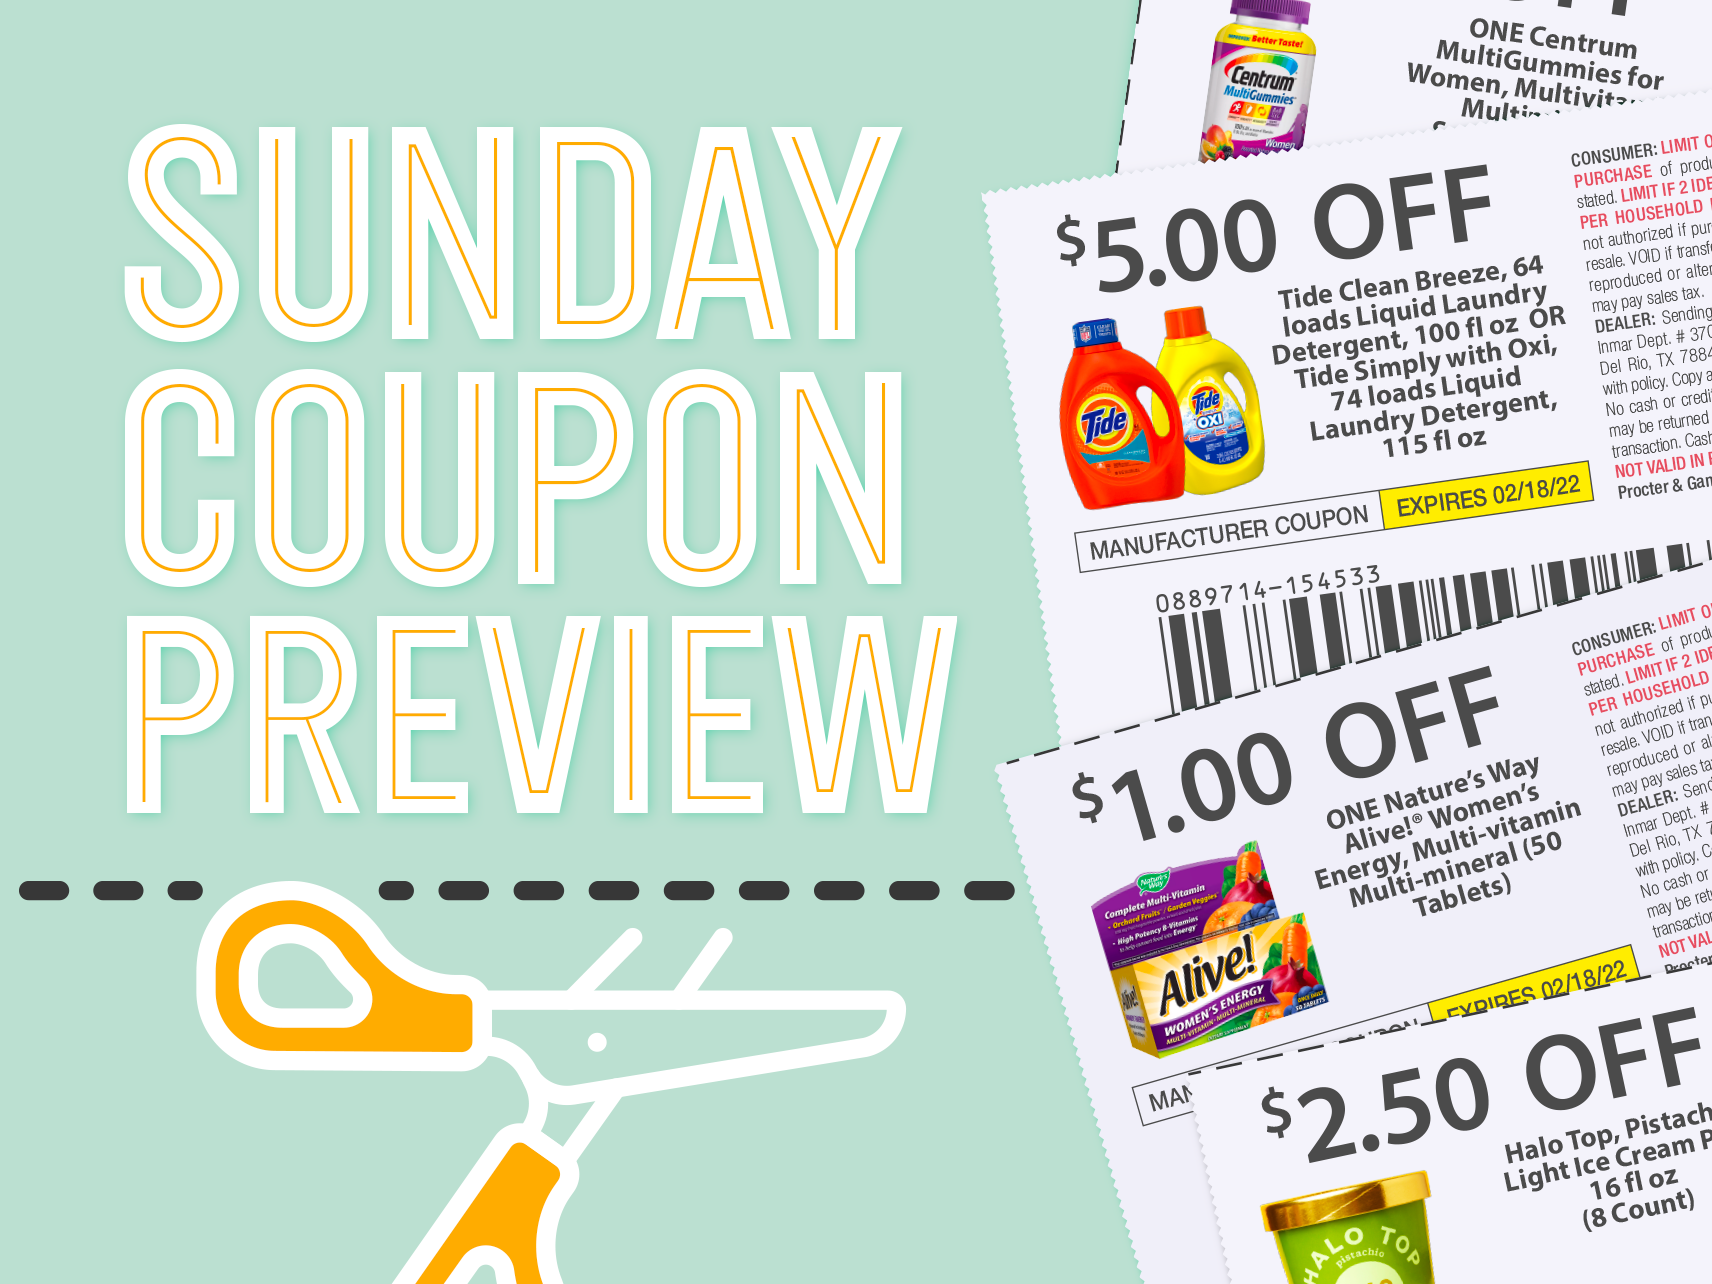 Sunday Coupon Preview For 11/20 – Two Inserts